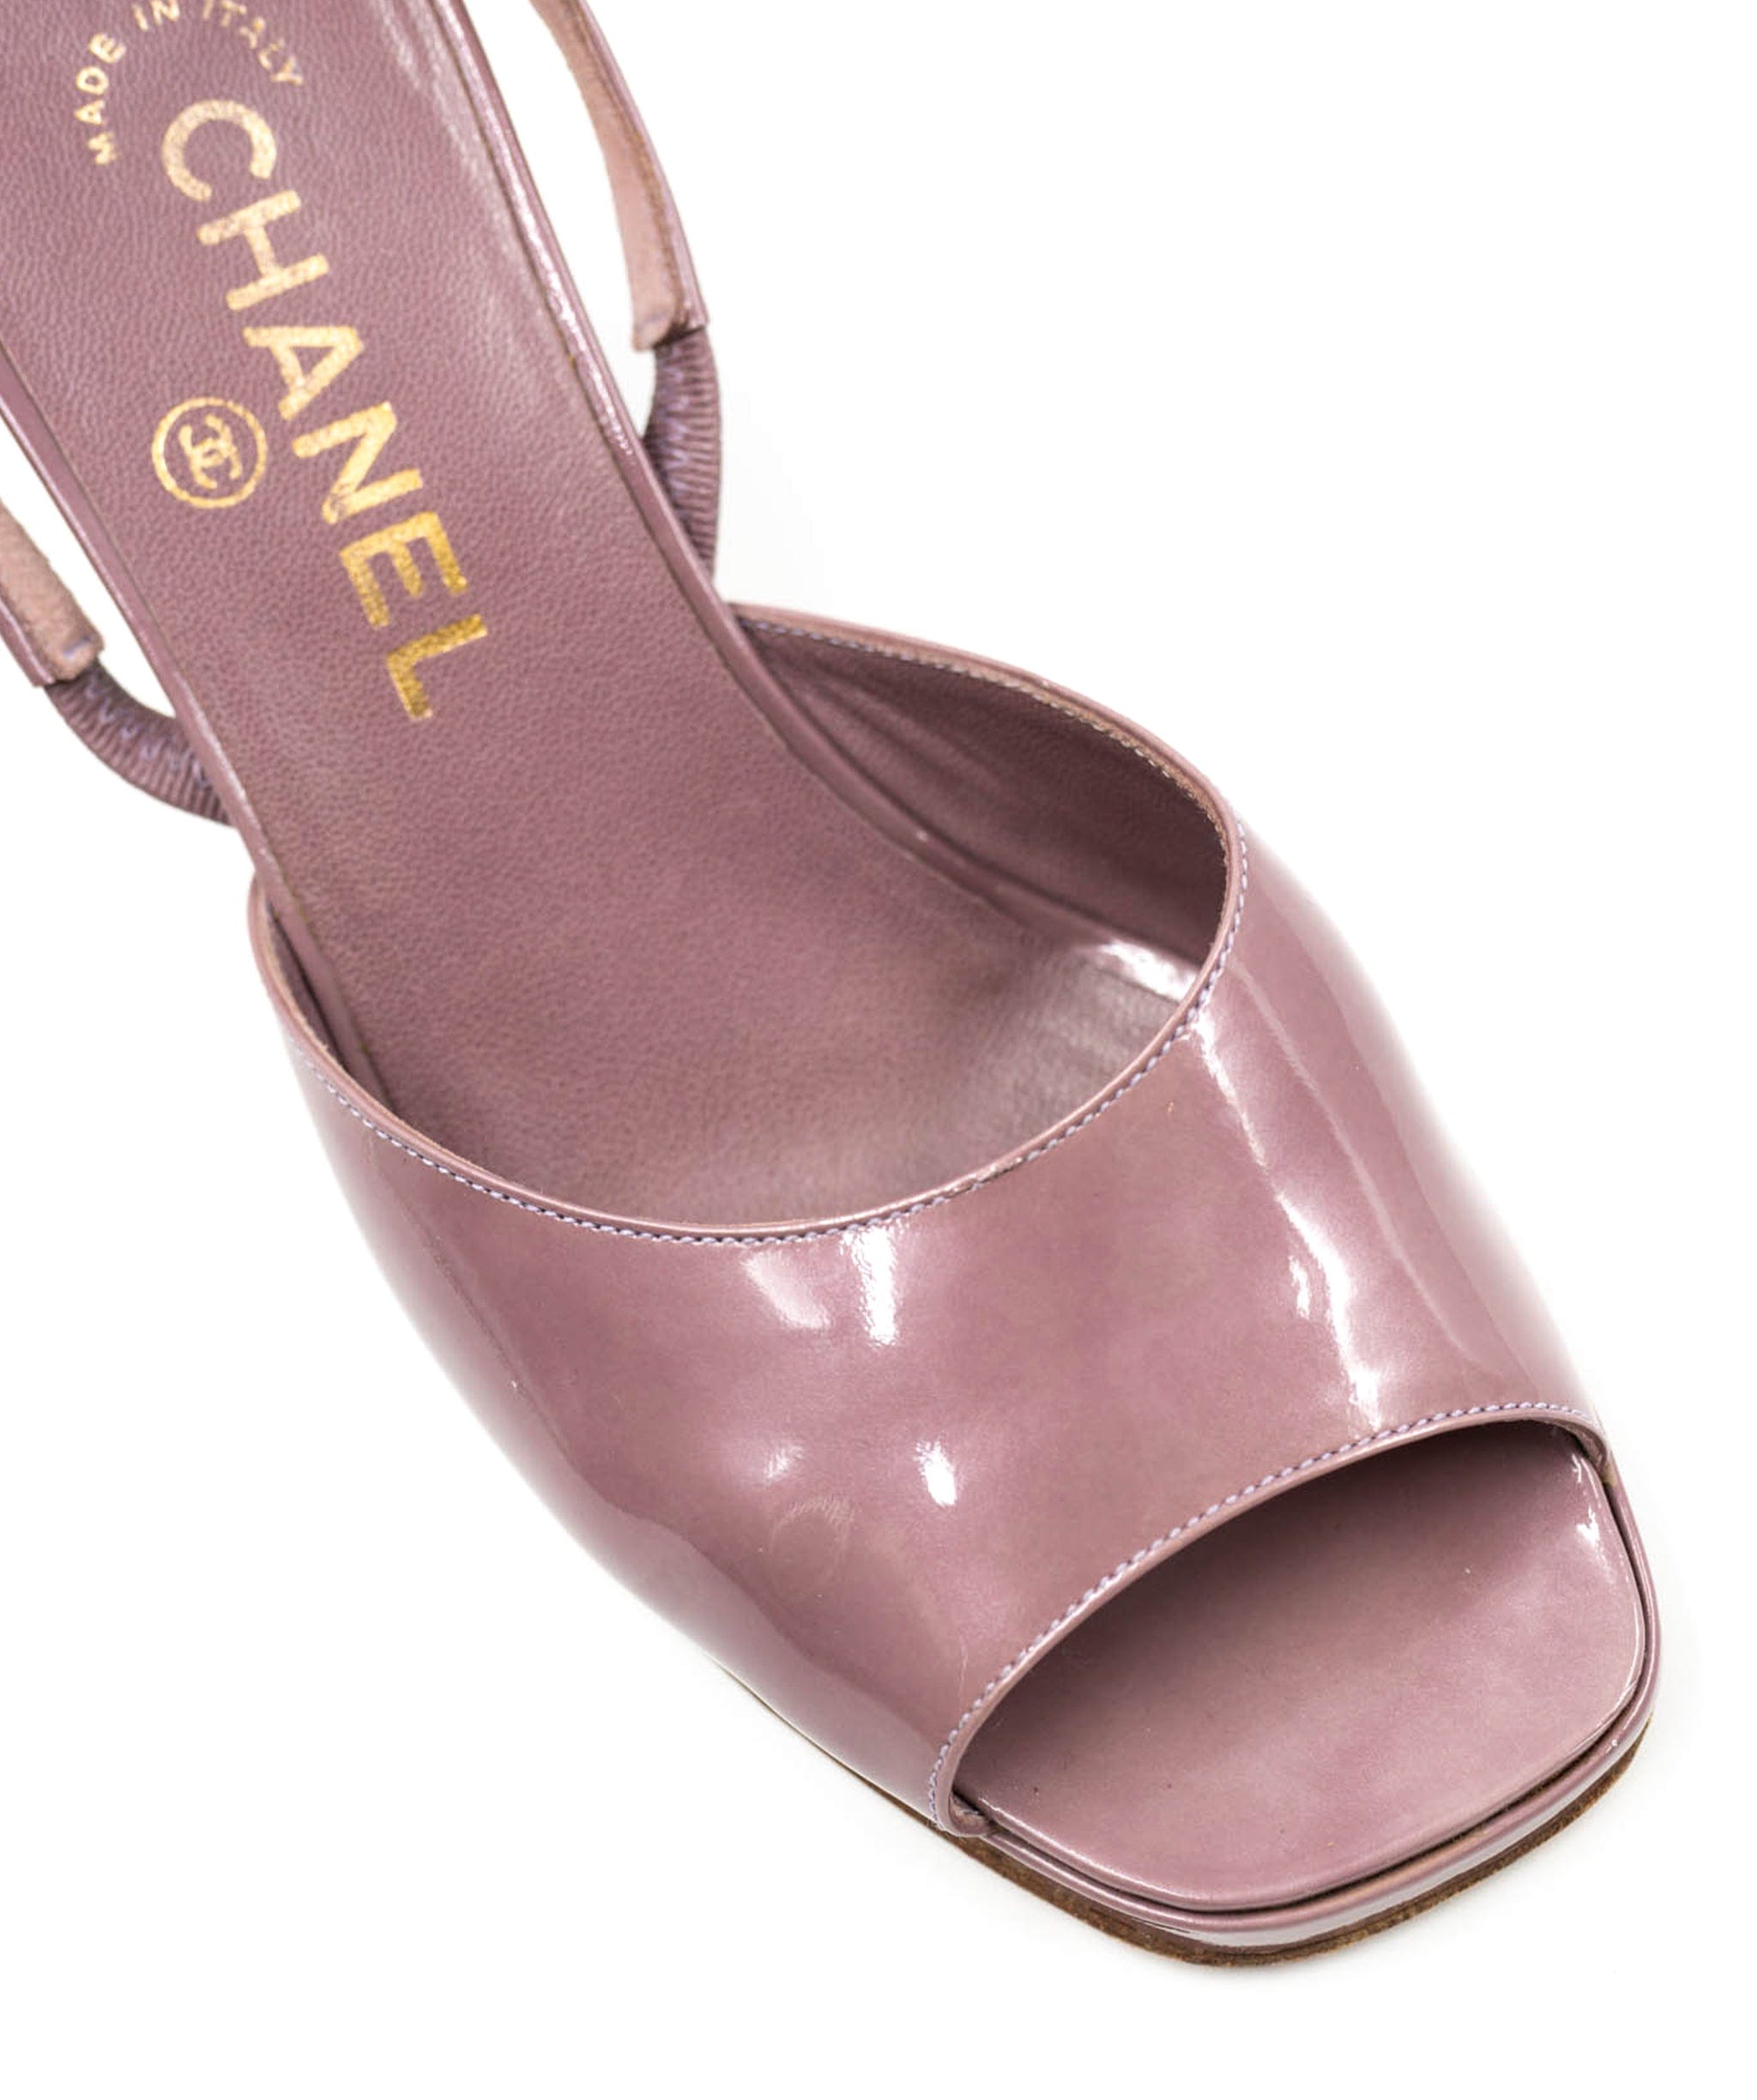 Chanel Chanel Pink Stacked heel Lilac Patent shoes Size EU 36.5 - AWC1761